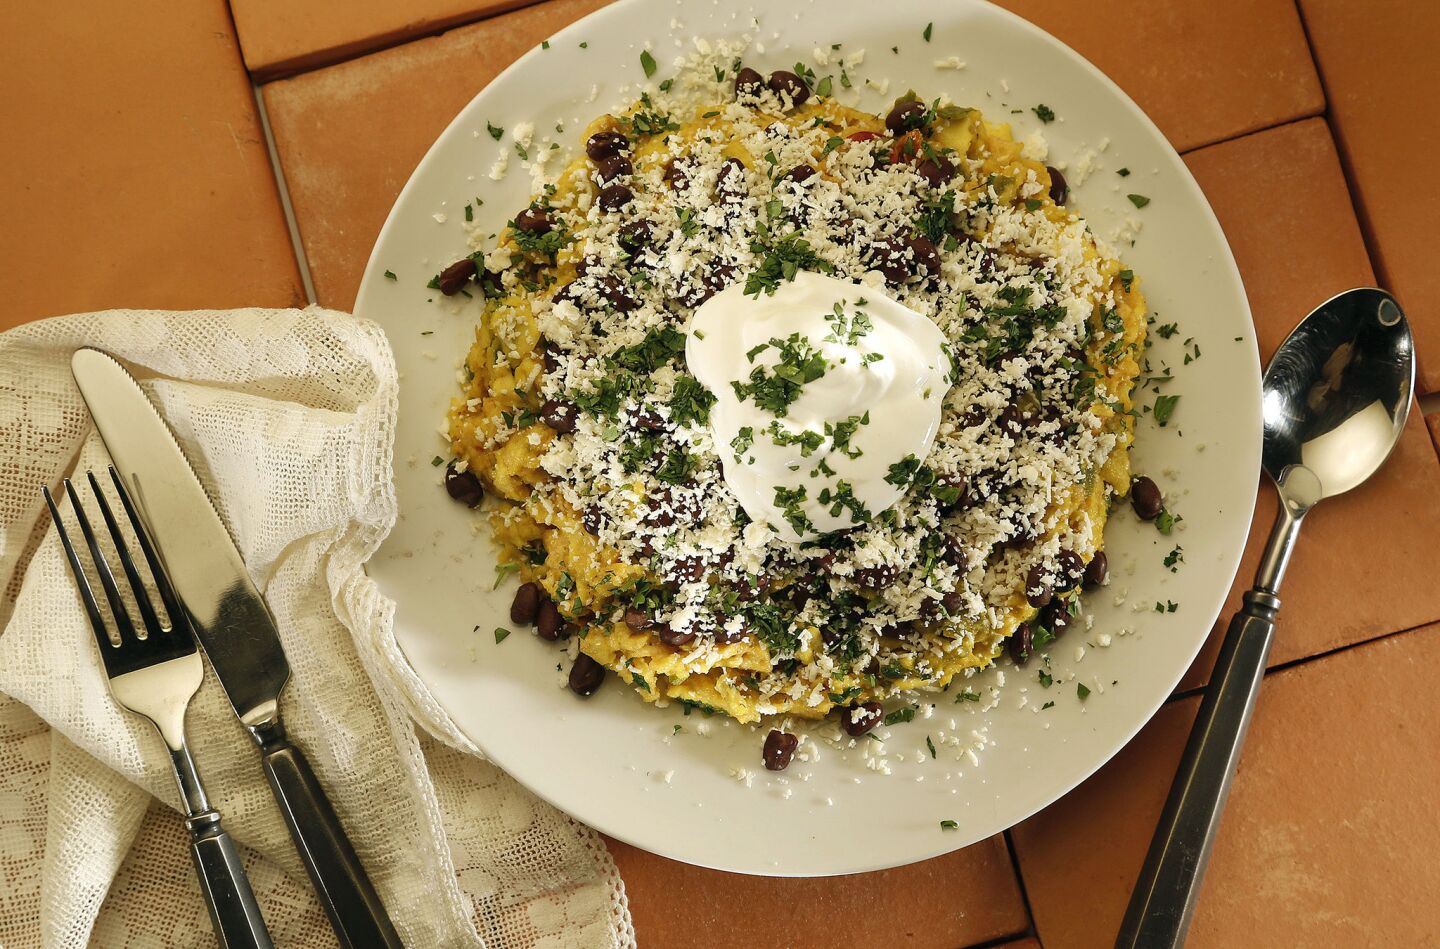 This comfort food is a one-dish meal. Recipe: New Mex migas